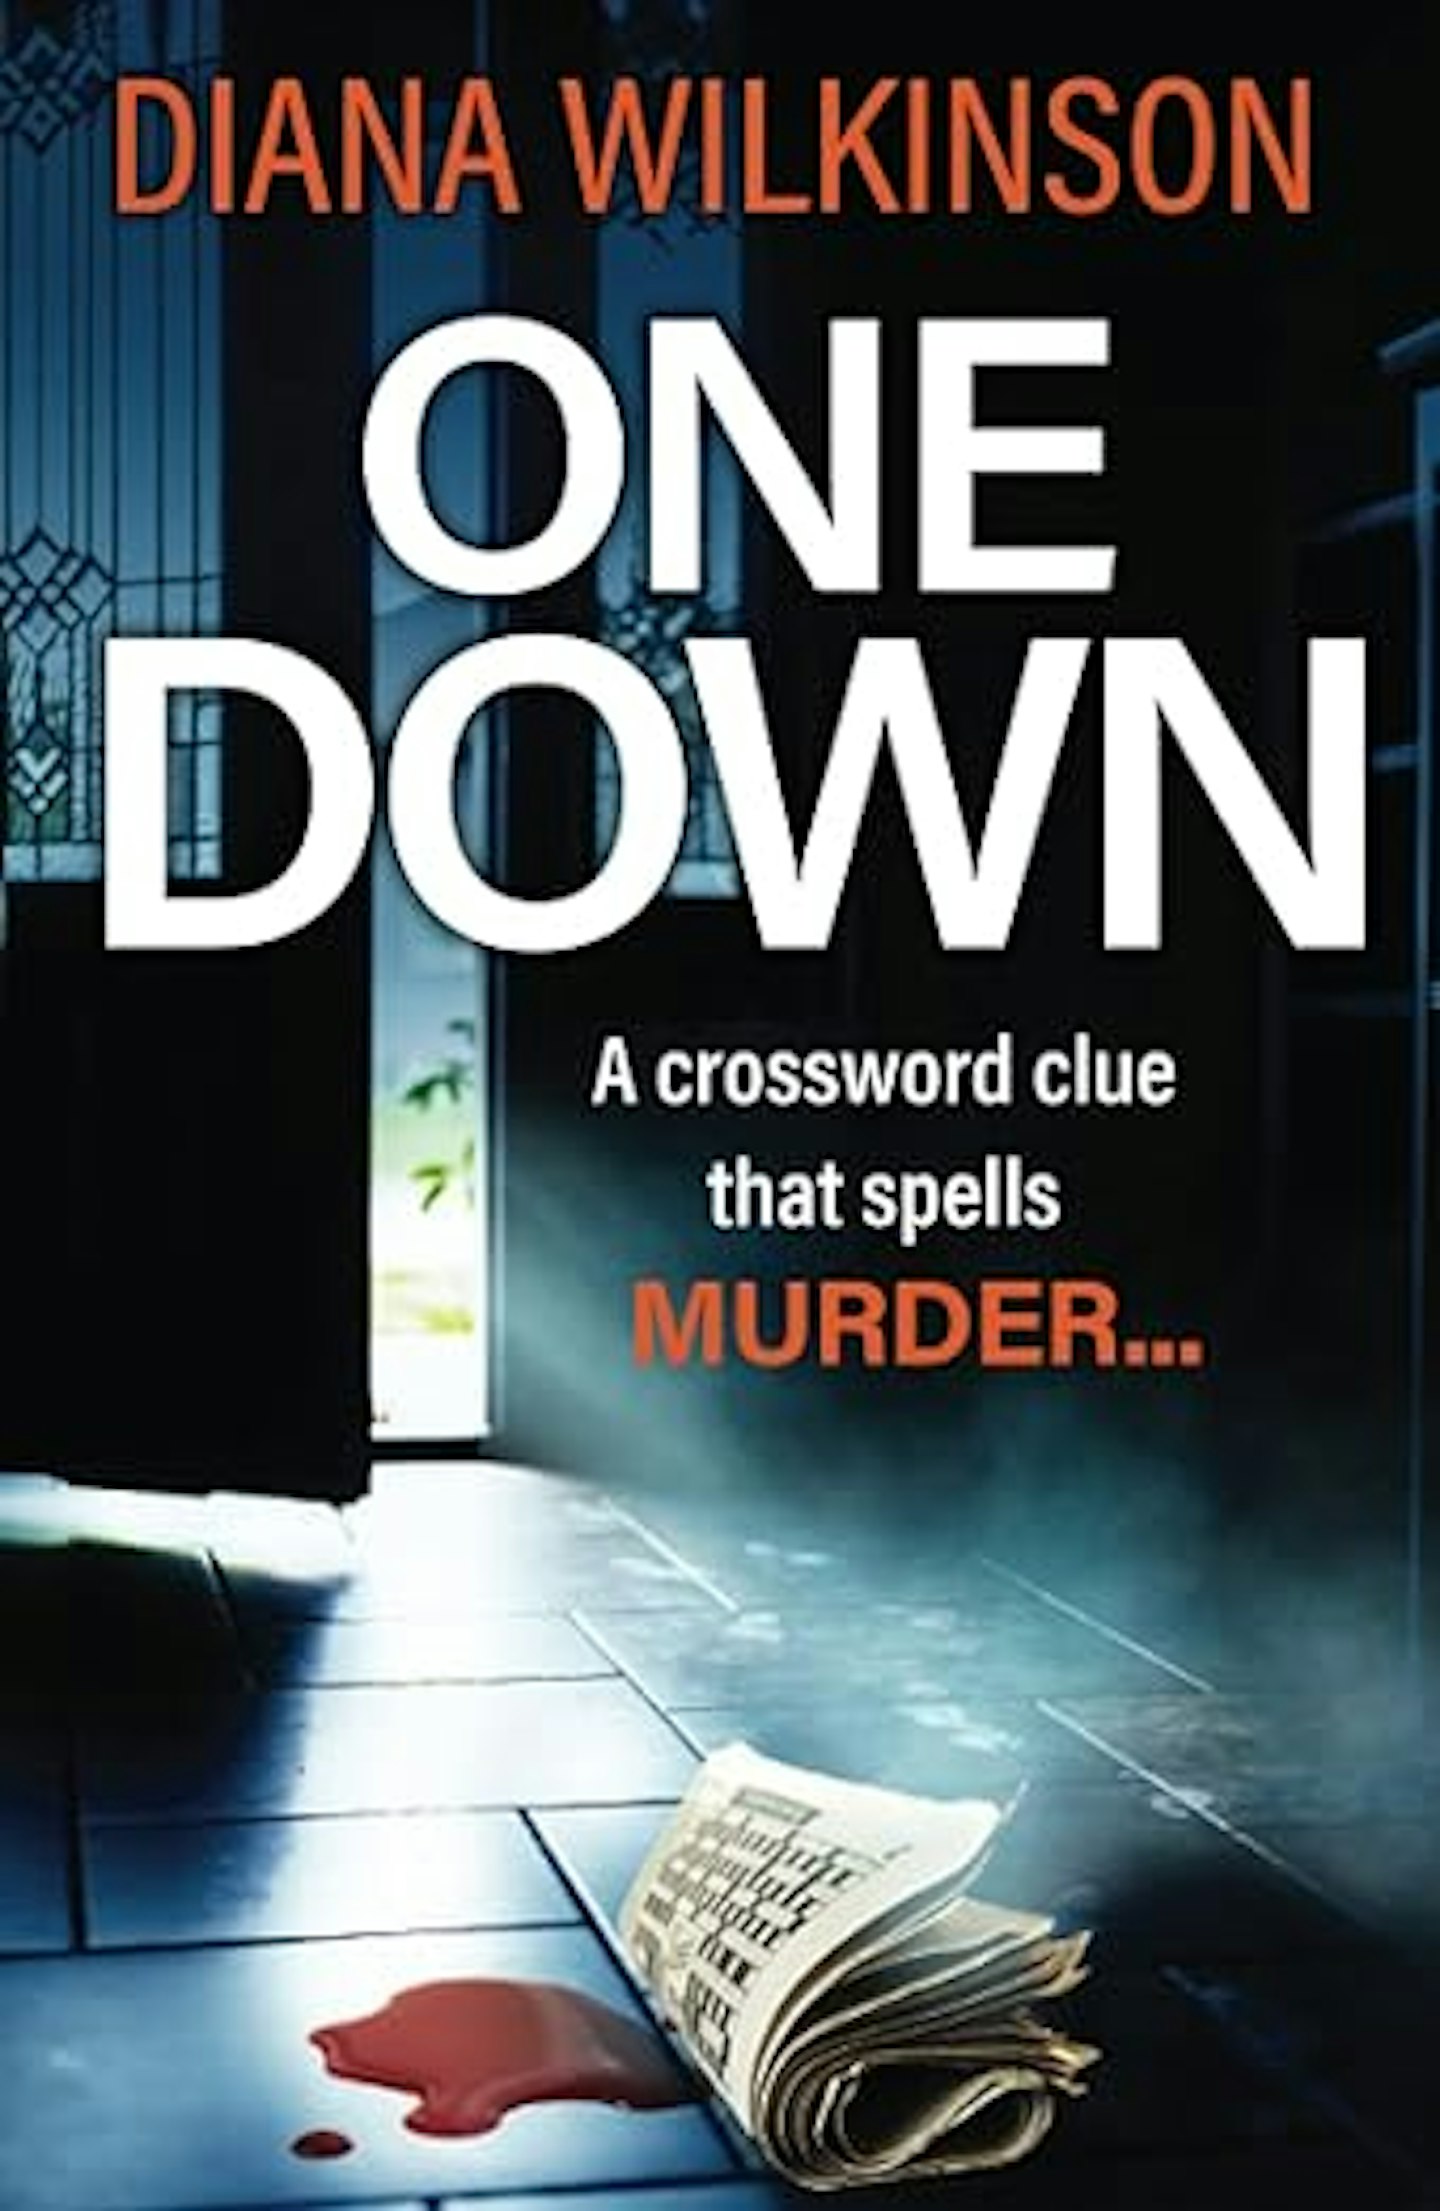 One Down by Diana Wilkinson book cover